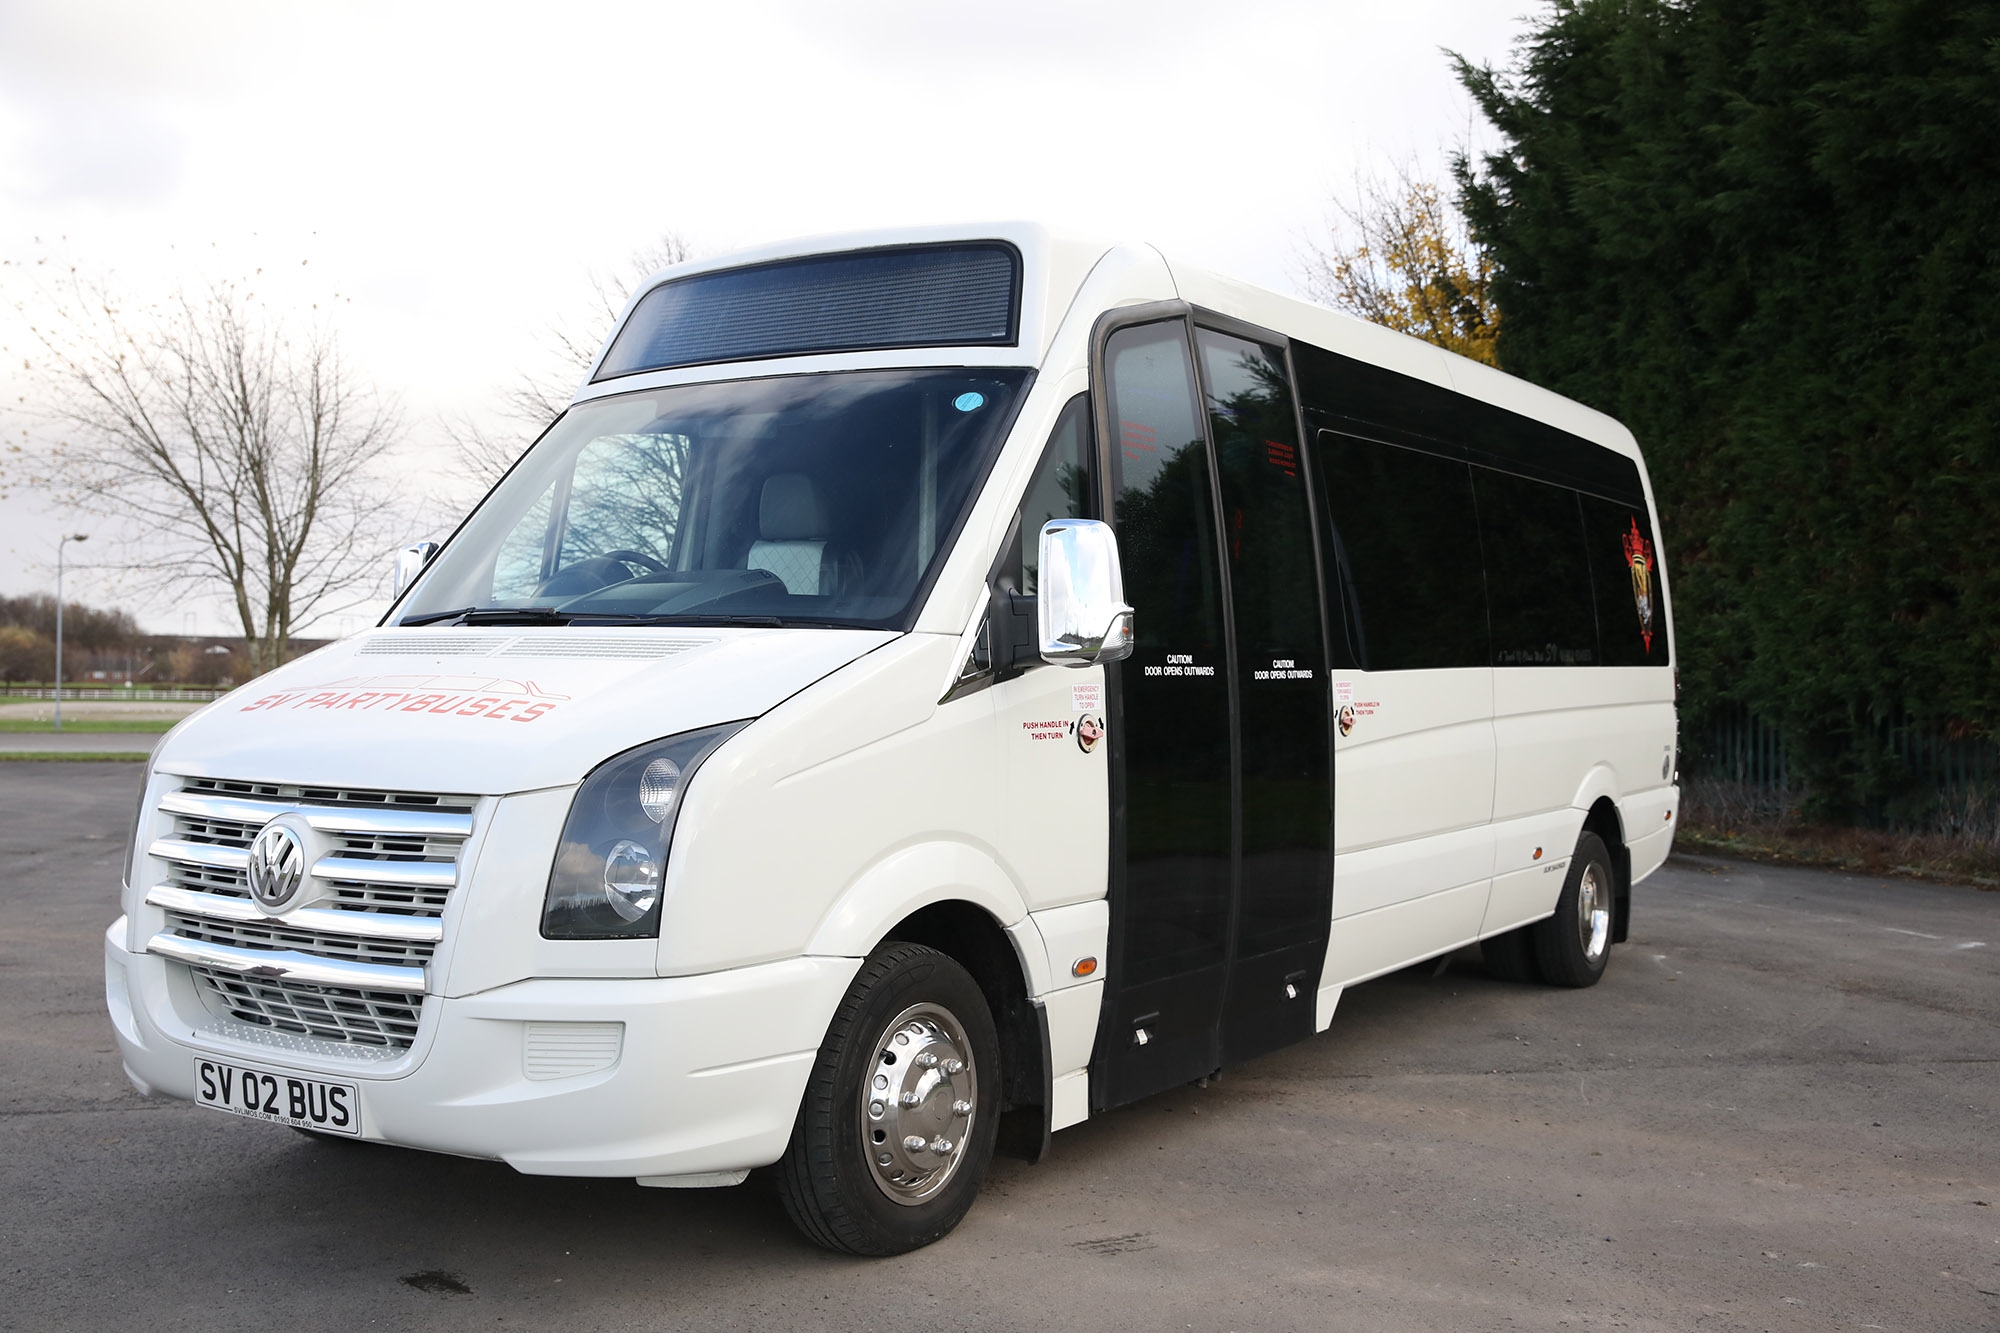 Party Bus Hire in Whitson, Newport and Gwent to Cardiff, Bristol and Beyond